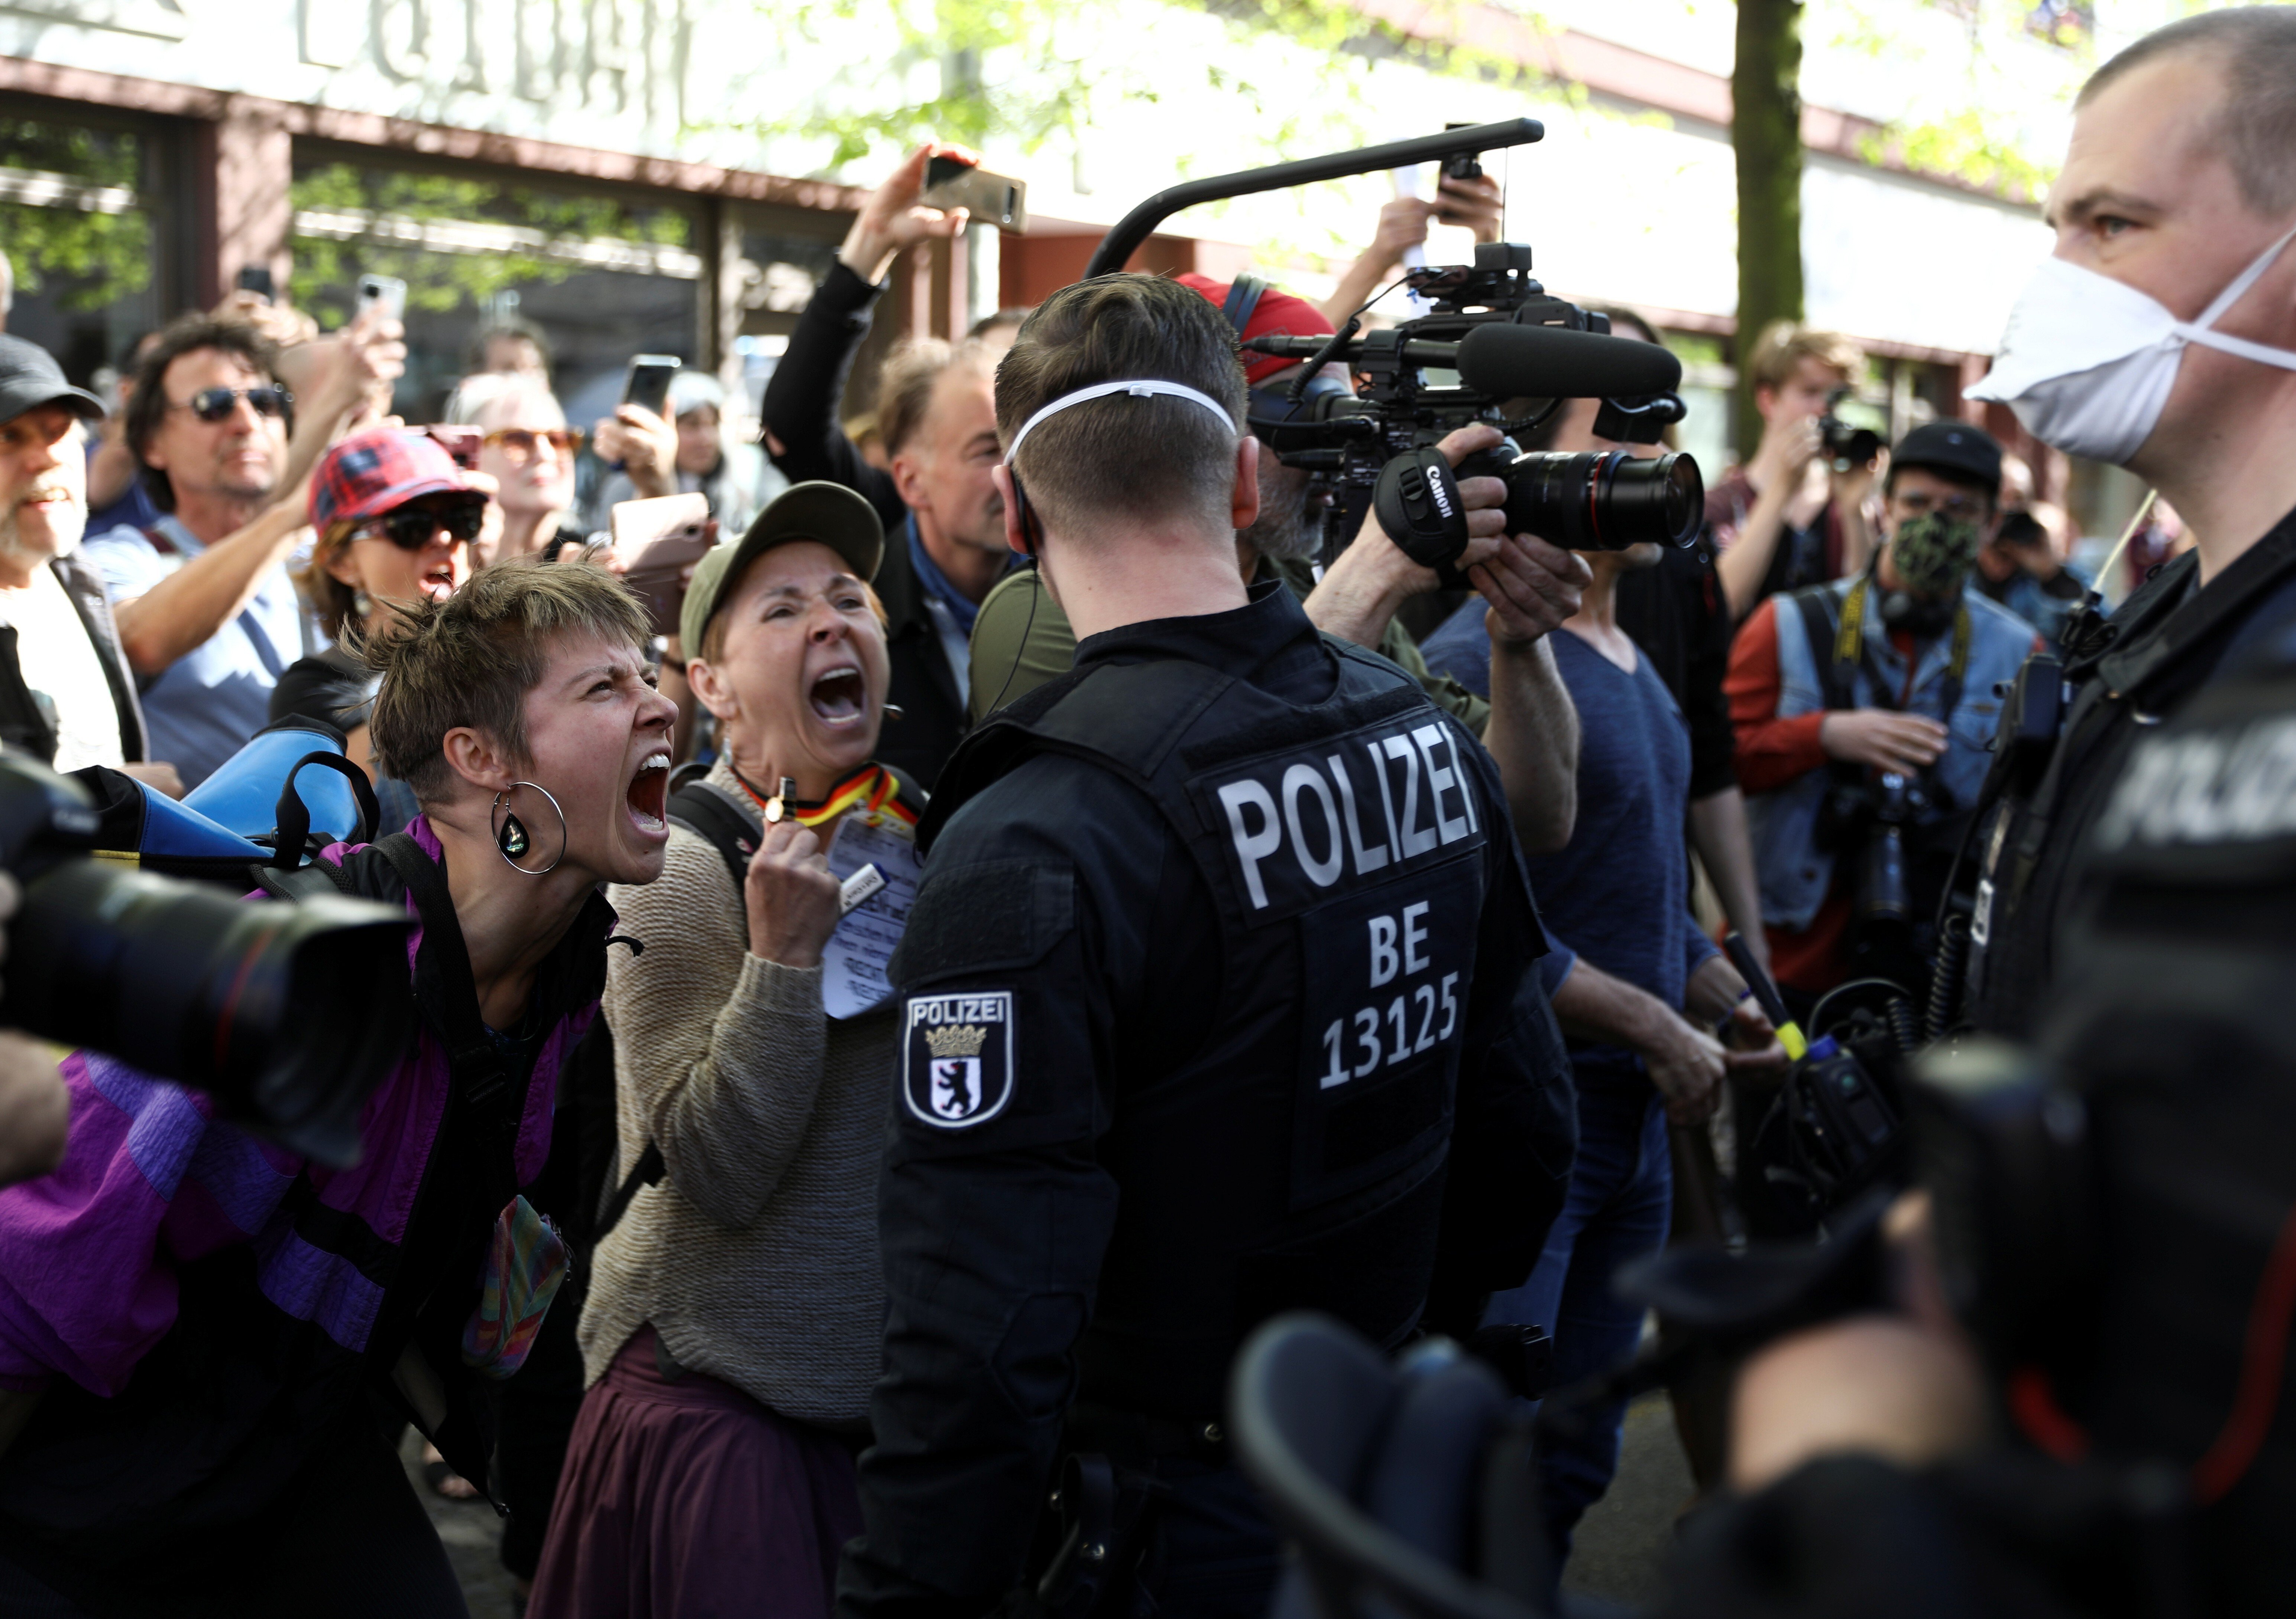 People shout at police during a demonstration in Berlin, Germany, on April 18. Photo: Reuters